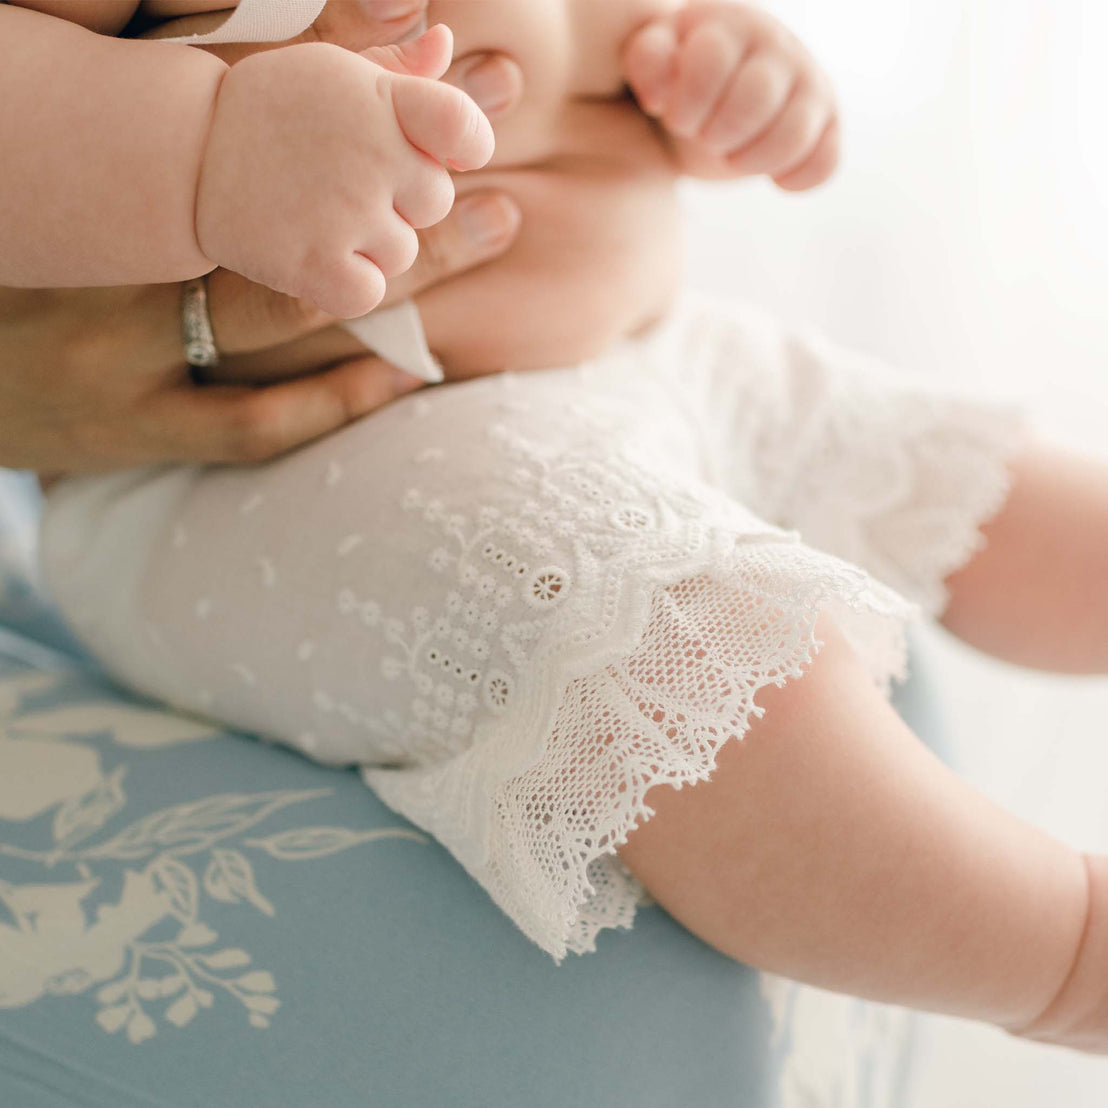 A close-up of a baby dressed in Emily Dress & Bloomers with a Green Sash for a christening, focusing on the baby’s legs and feet, against a soft blue and white vintage background.